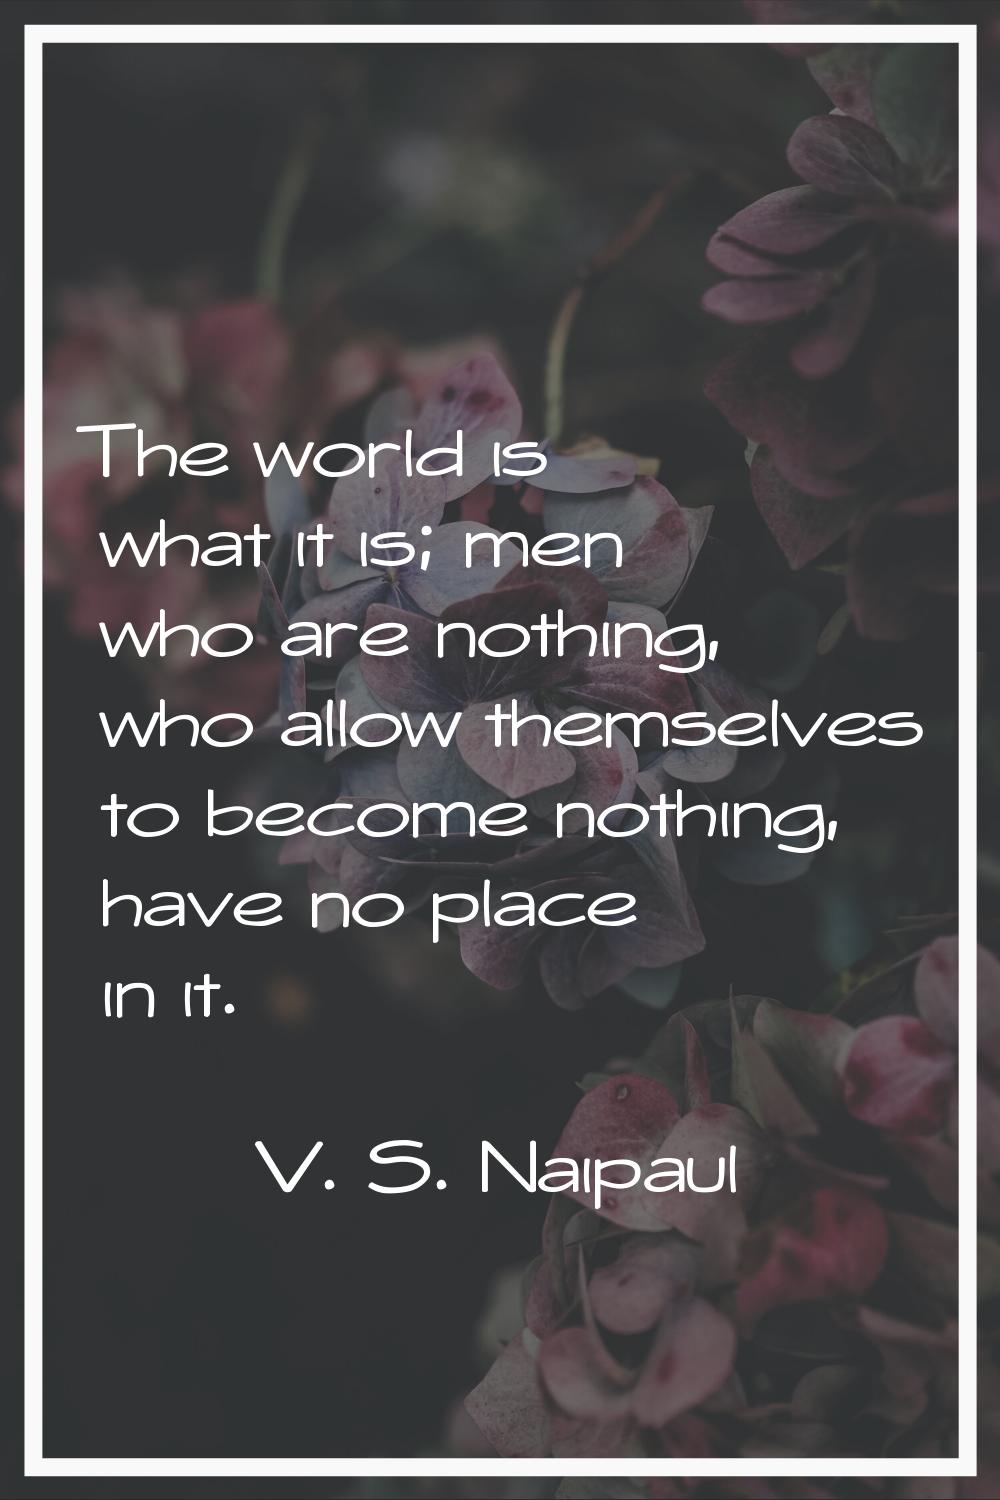 The world is what it is; men who are nothing, who allow themselves to become nothing, have no place